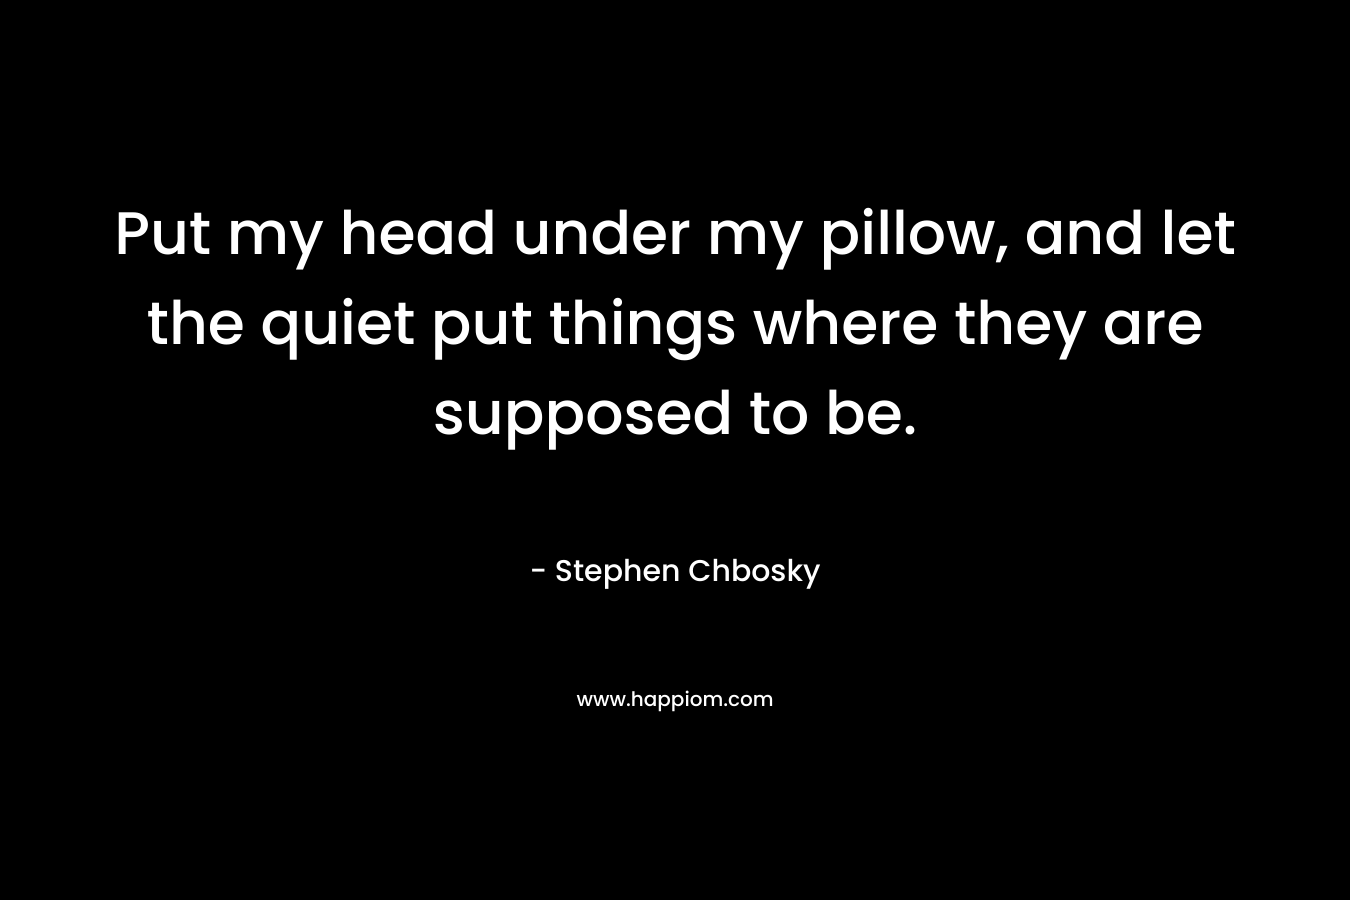 Put my head under my pillow, and let the quiet put things where they are supposed to be.